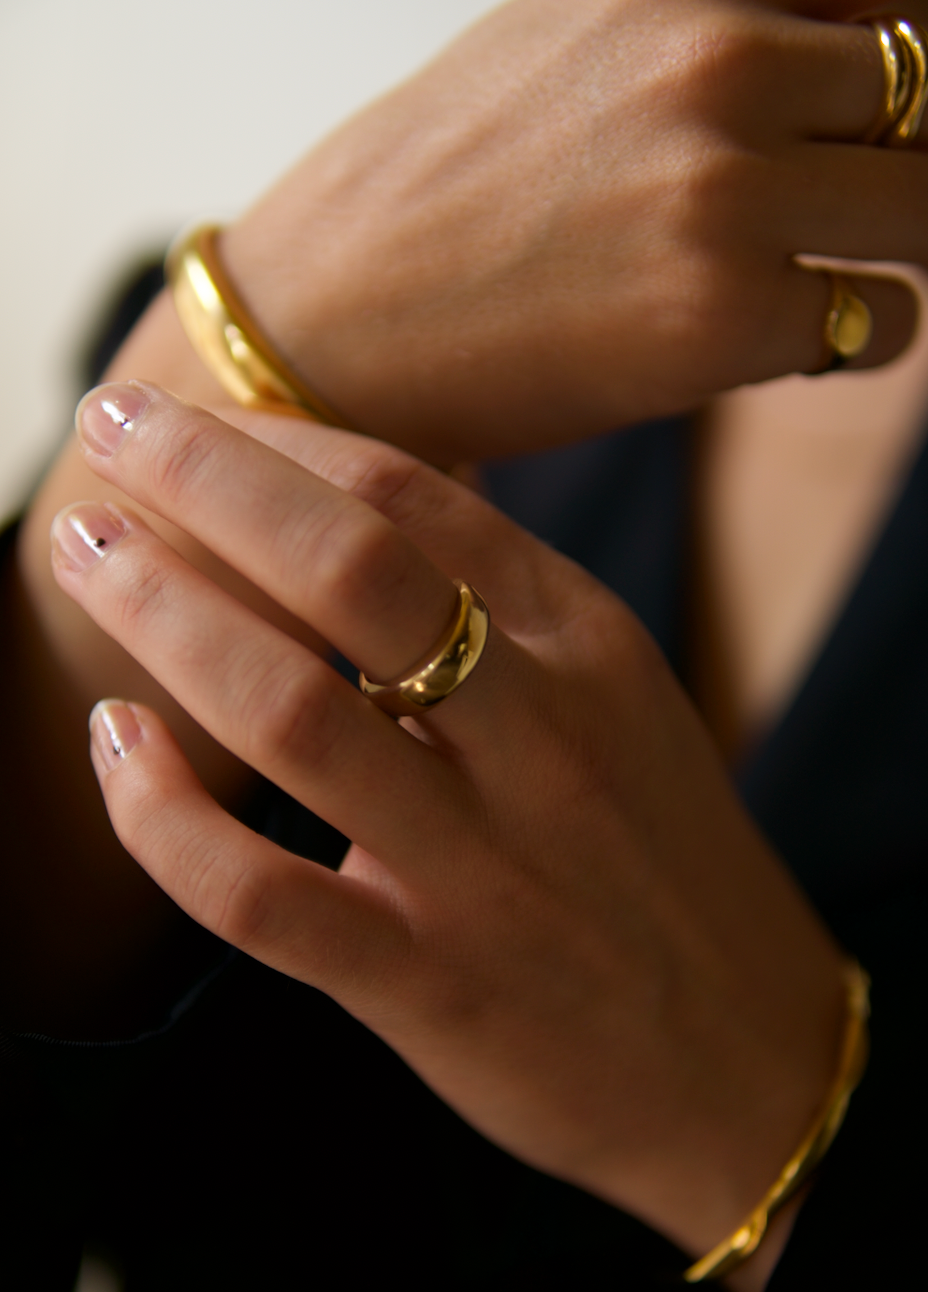 Detail shot of a woman's hands adorned with minimalist gold rings and a matching bracelets, wearing a black blazer.